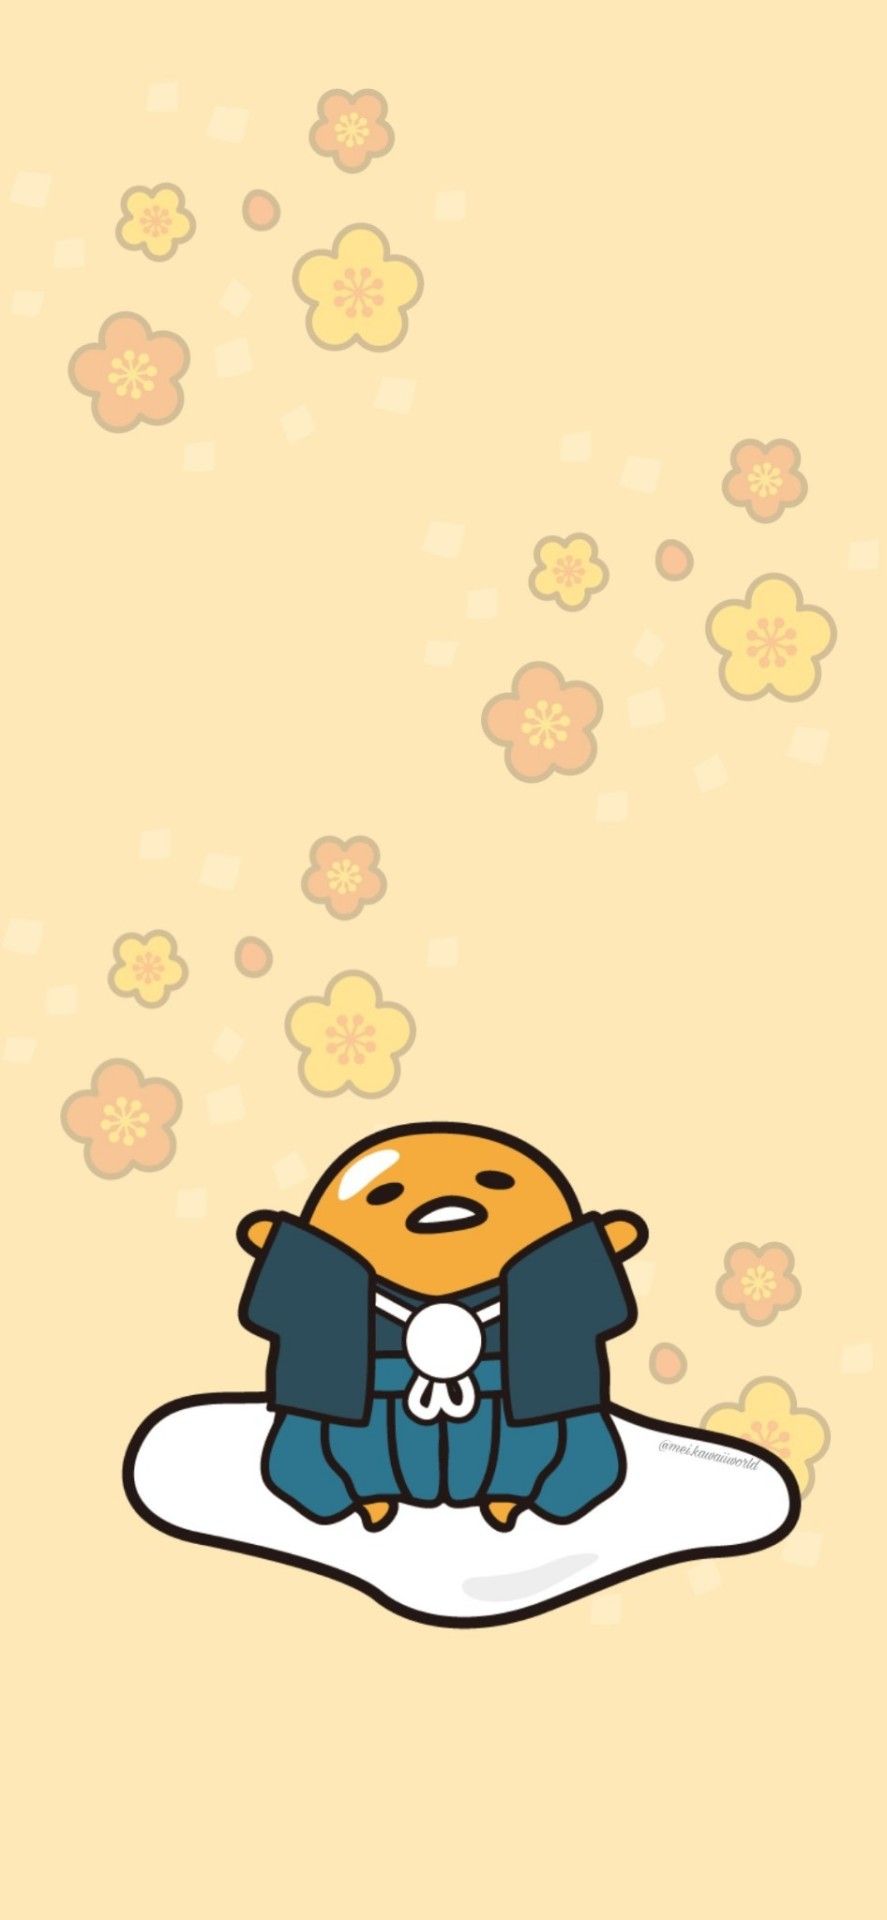 A picture of a cartoon character, Gudetama, sitting on a white piece of egg white with yellow flowers around him. - Gudetama